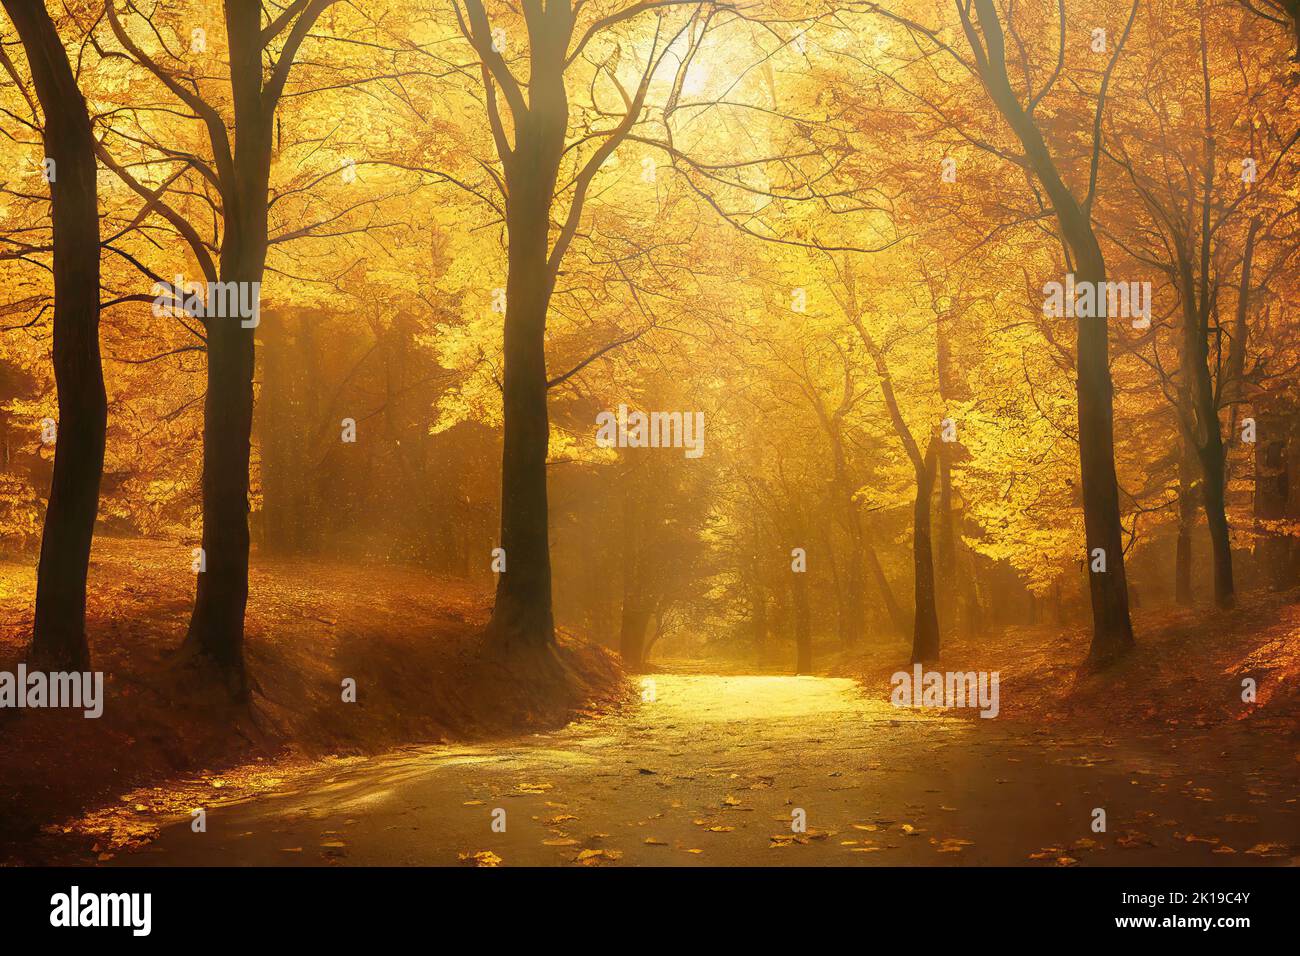 Alley perspective in sunlit autumn park with golden mist and fallen yellow leaves, beautiful landscape. Digital illustration based on render by neural Stock Photo